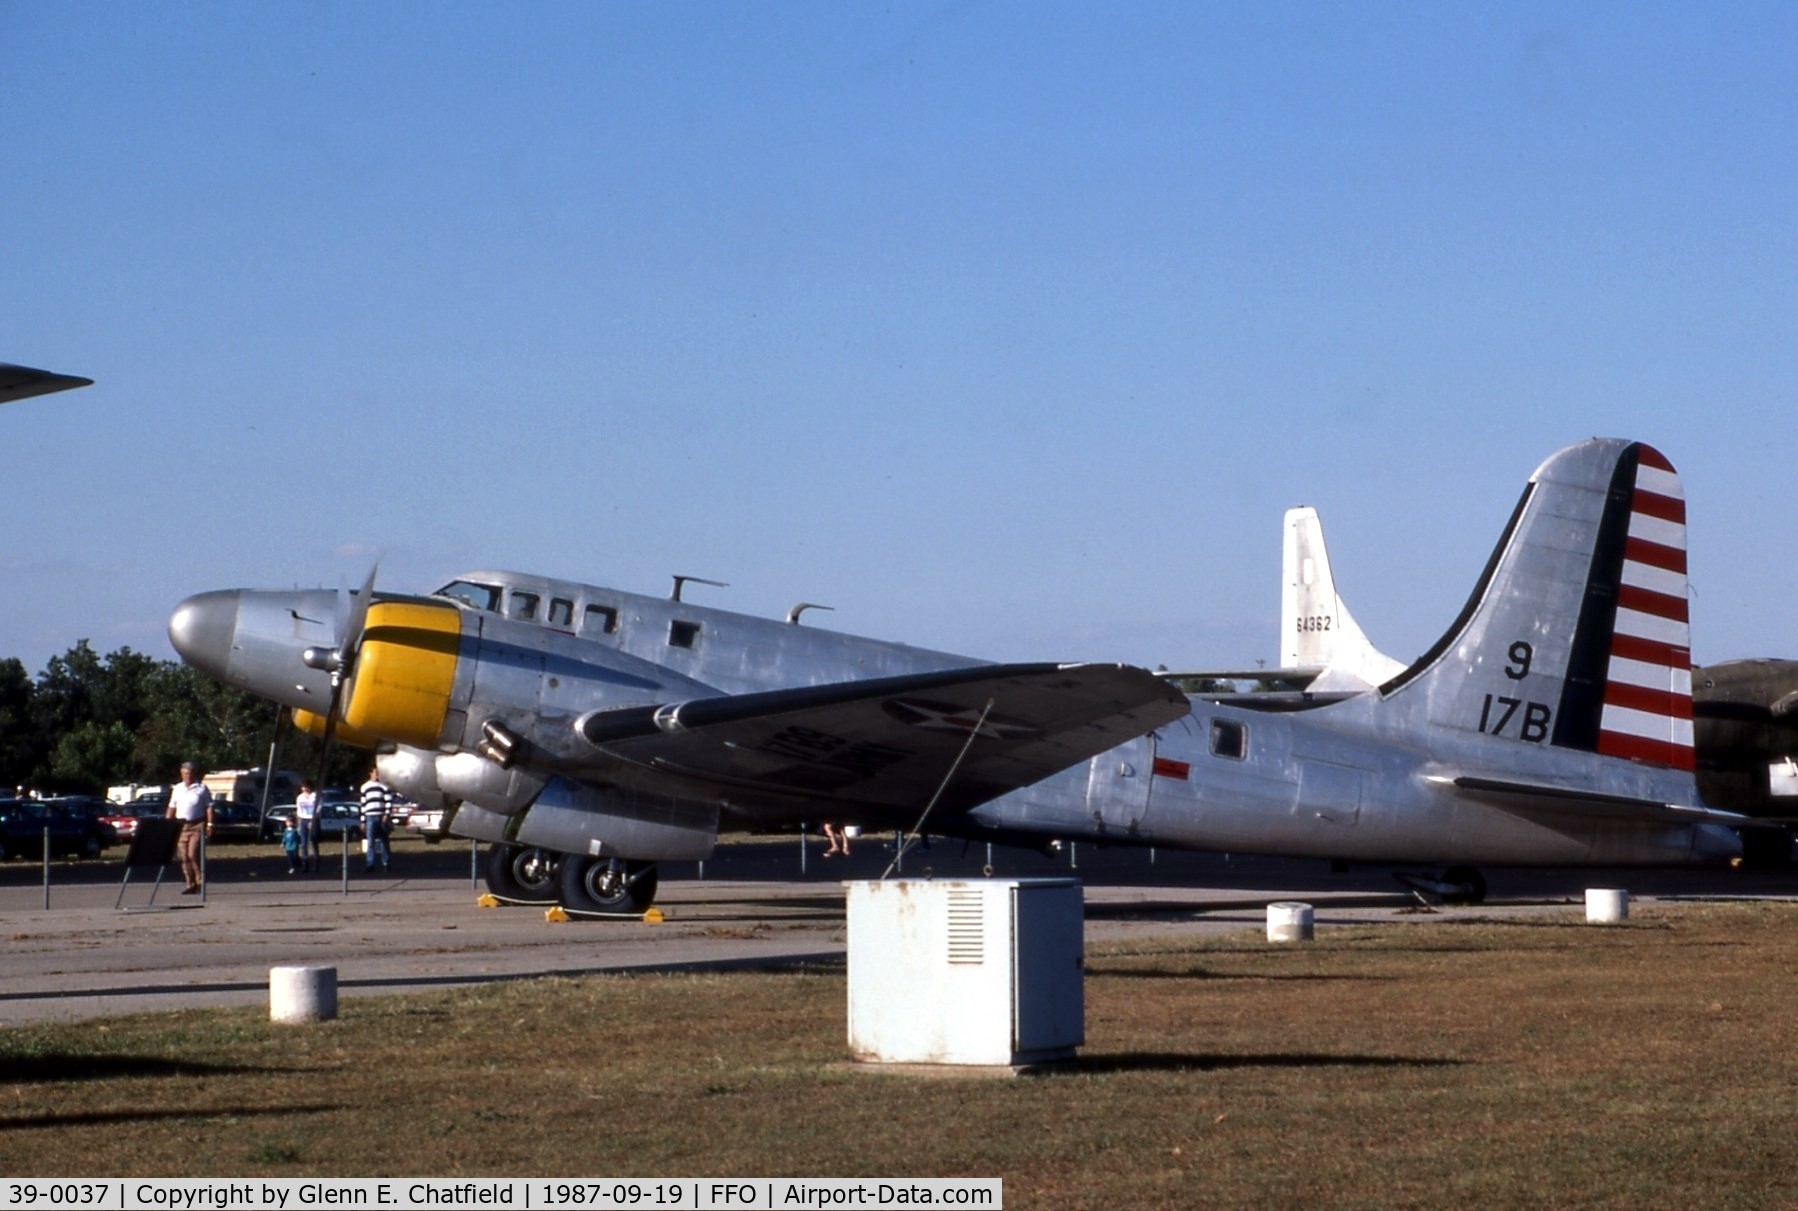 39-0037, 1939 Douglas B-23 Dragon C/N 2723, B-23 Dragon at the National Museum of the United States Air Force